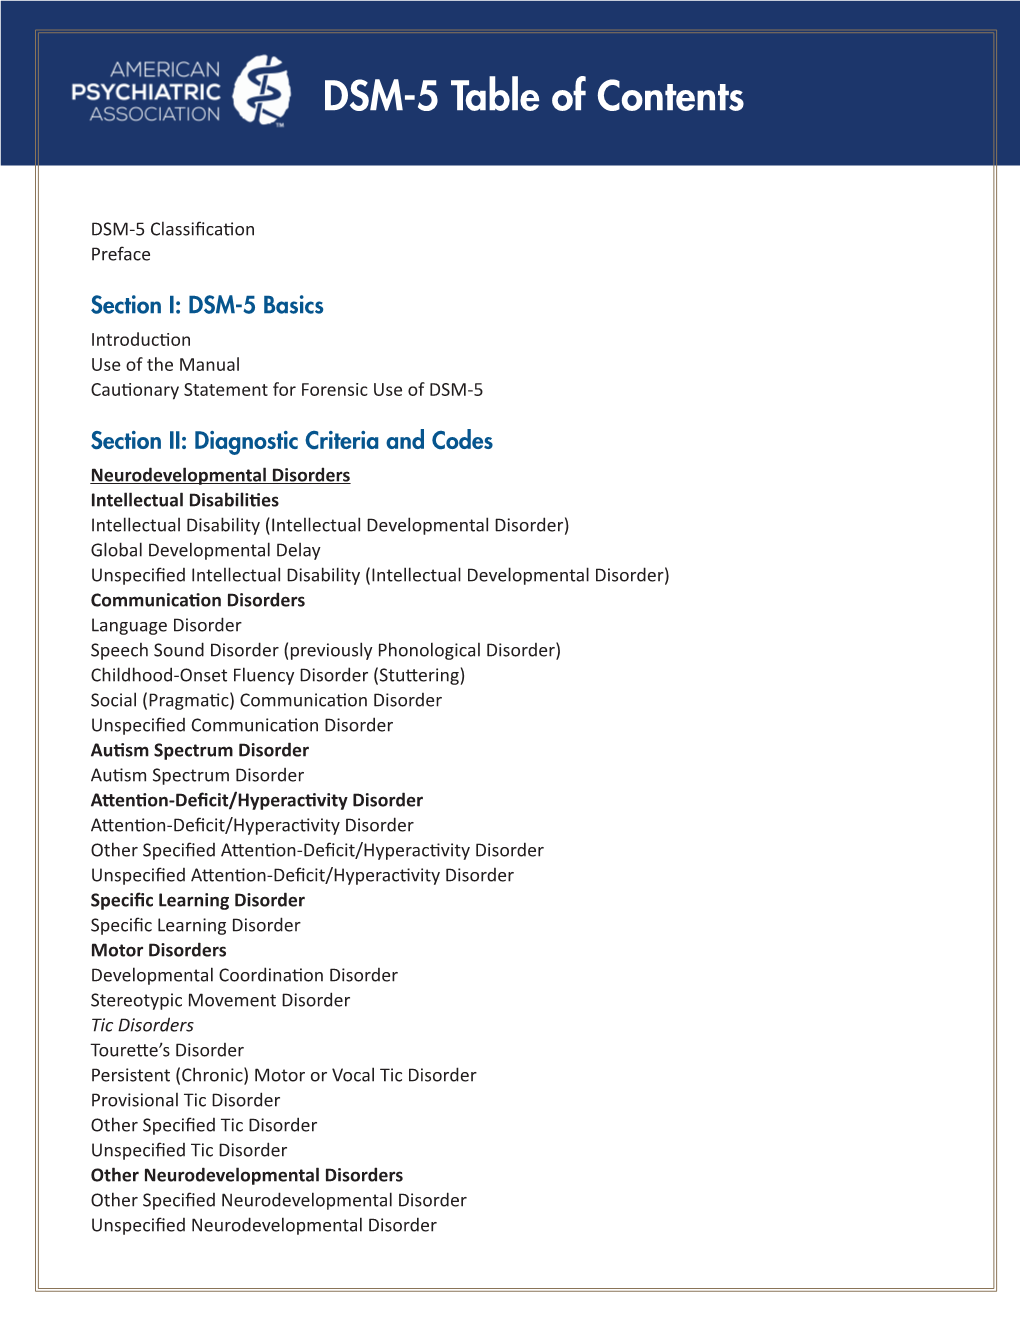 DSM-5 Table of Contents